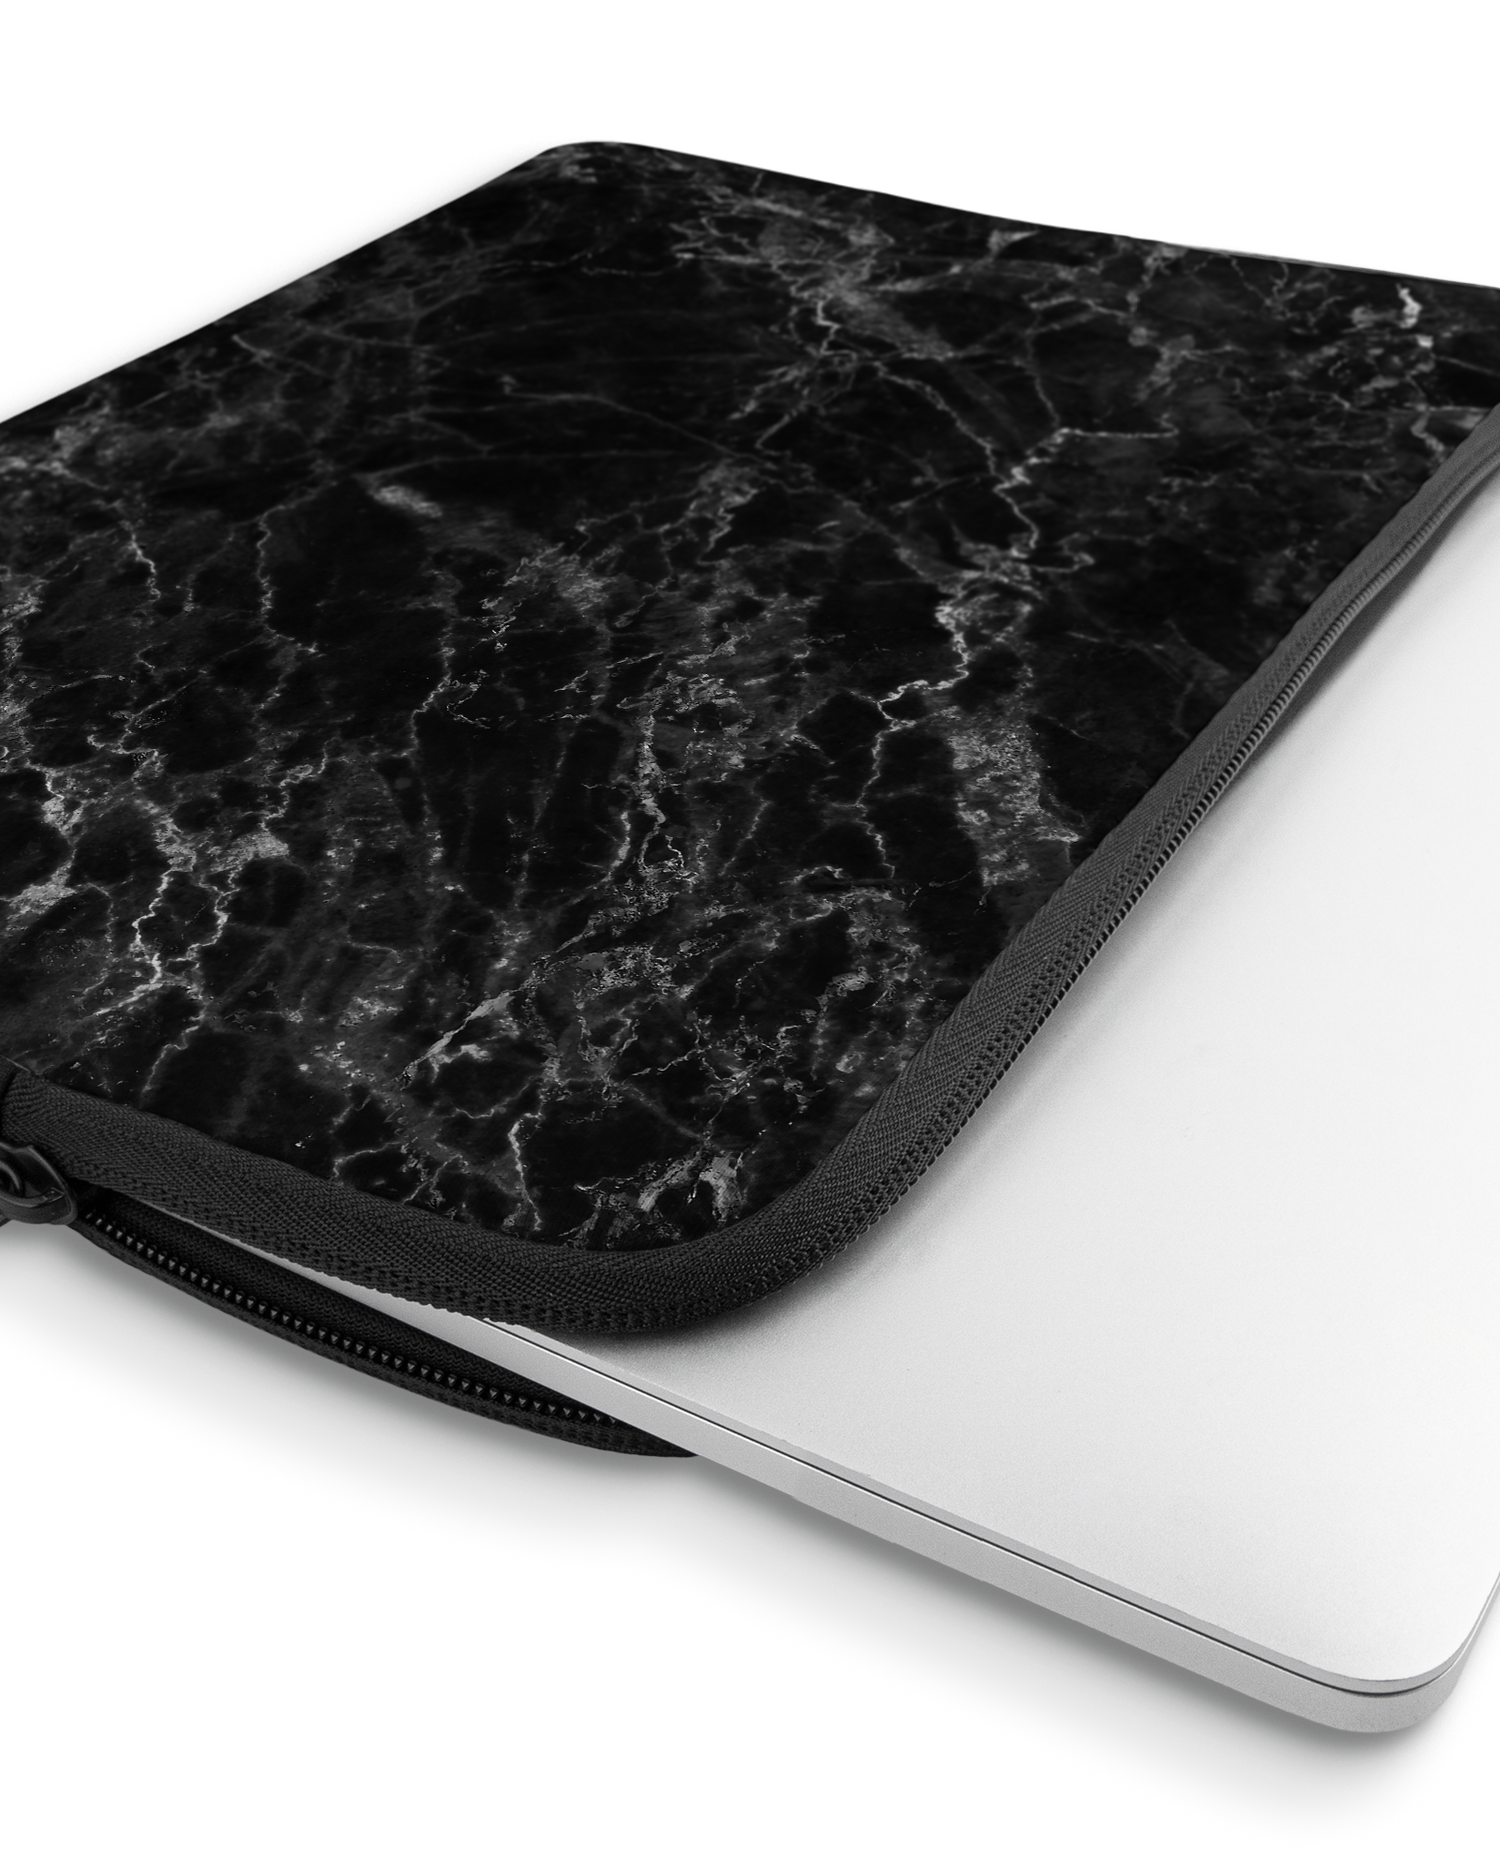 Midnight Marble Laptop Case 13 inch with device inside